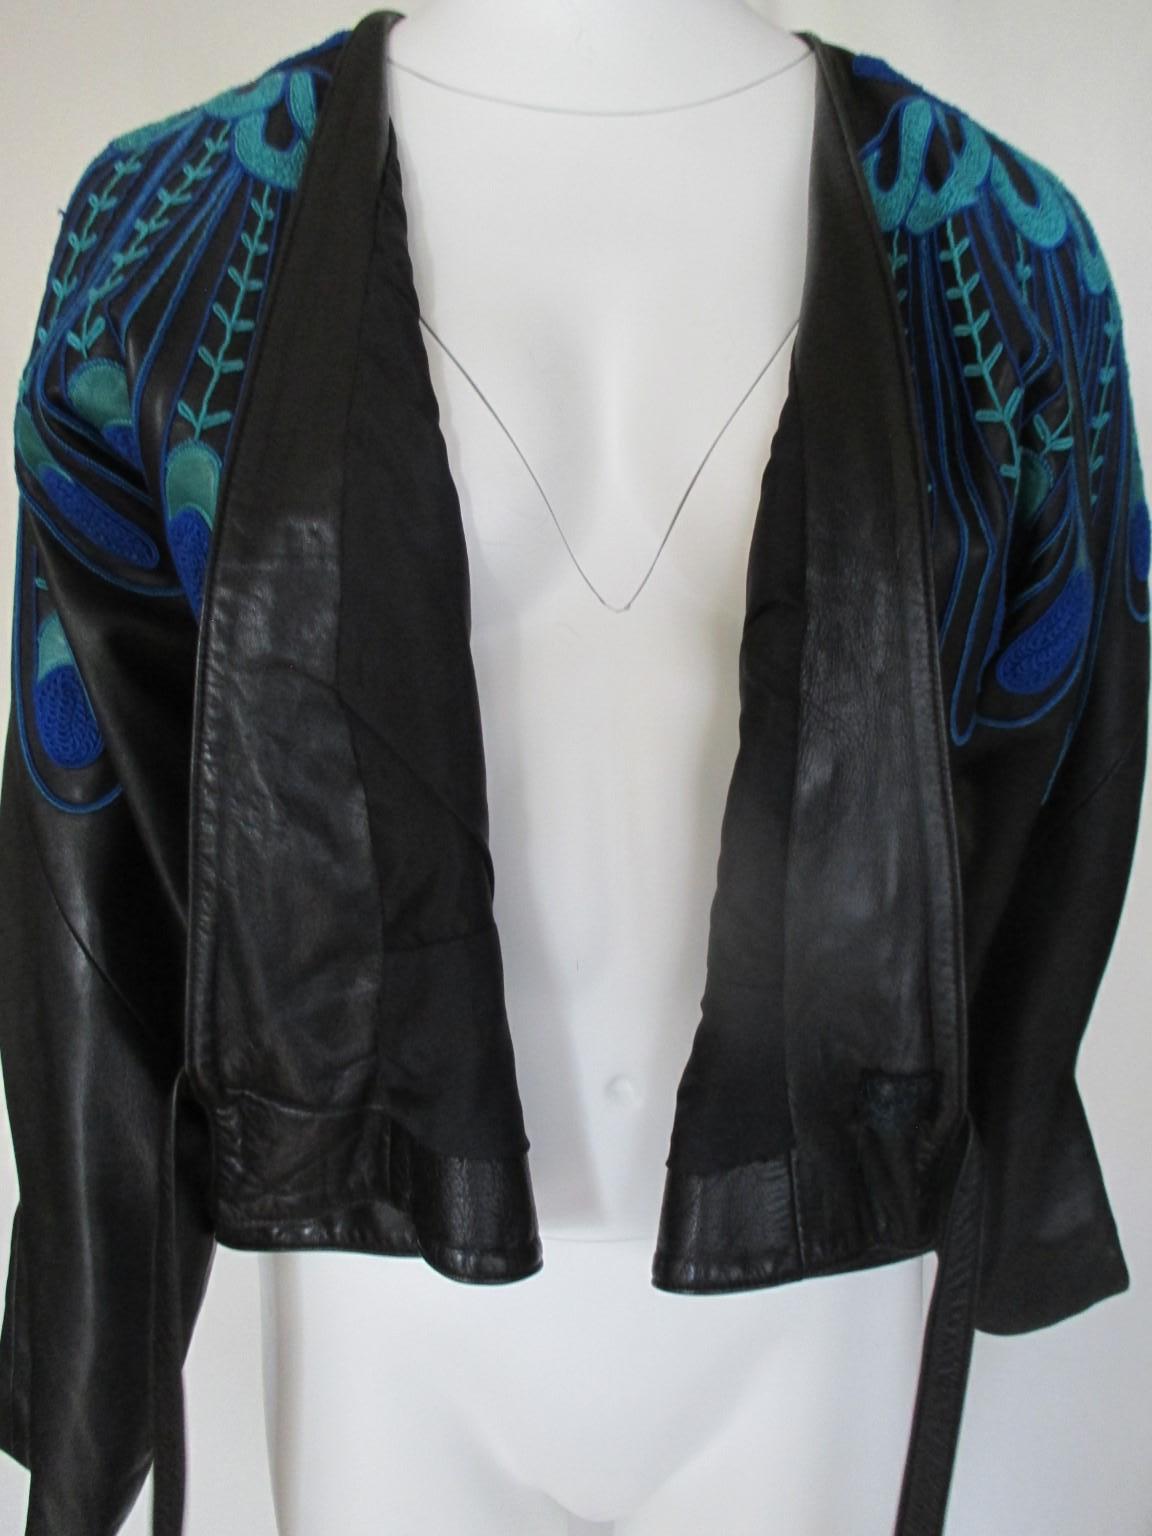 80's Jitrois Peacock Feather Blue Leather Jacket In Excellent Condition For Sale In Amsterdam, NL